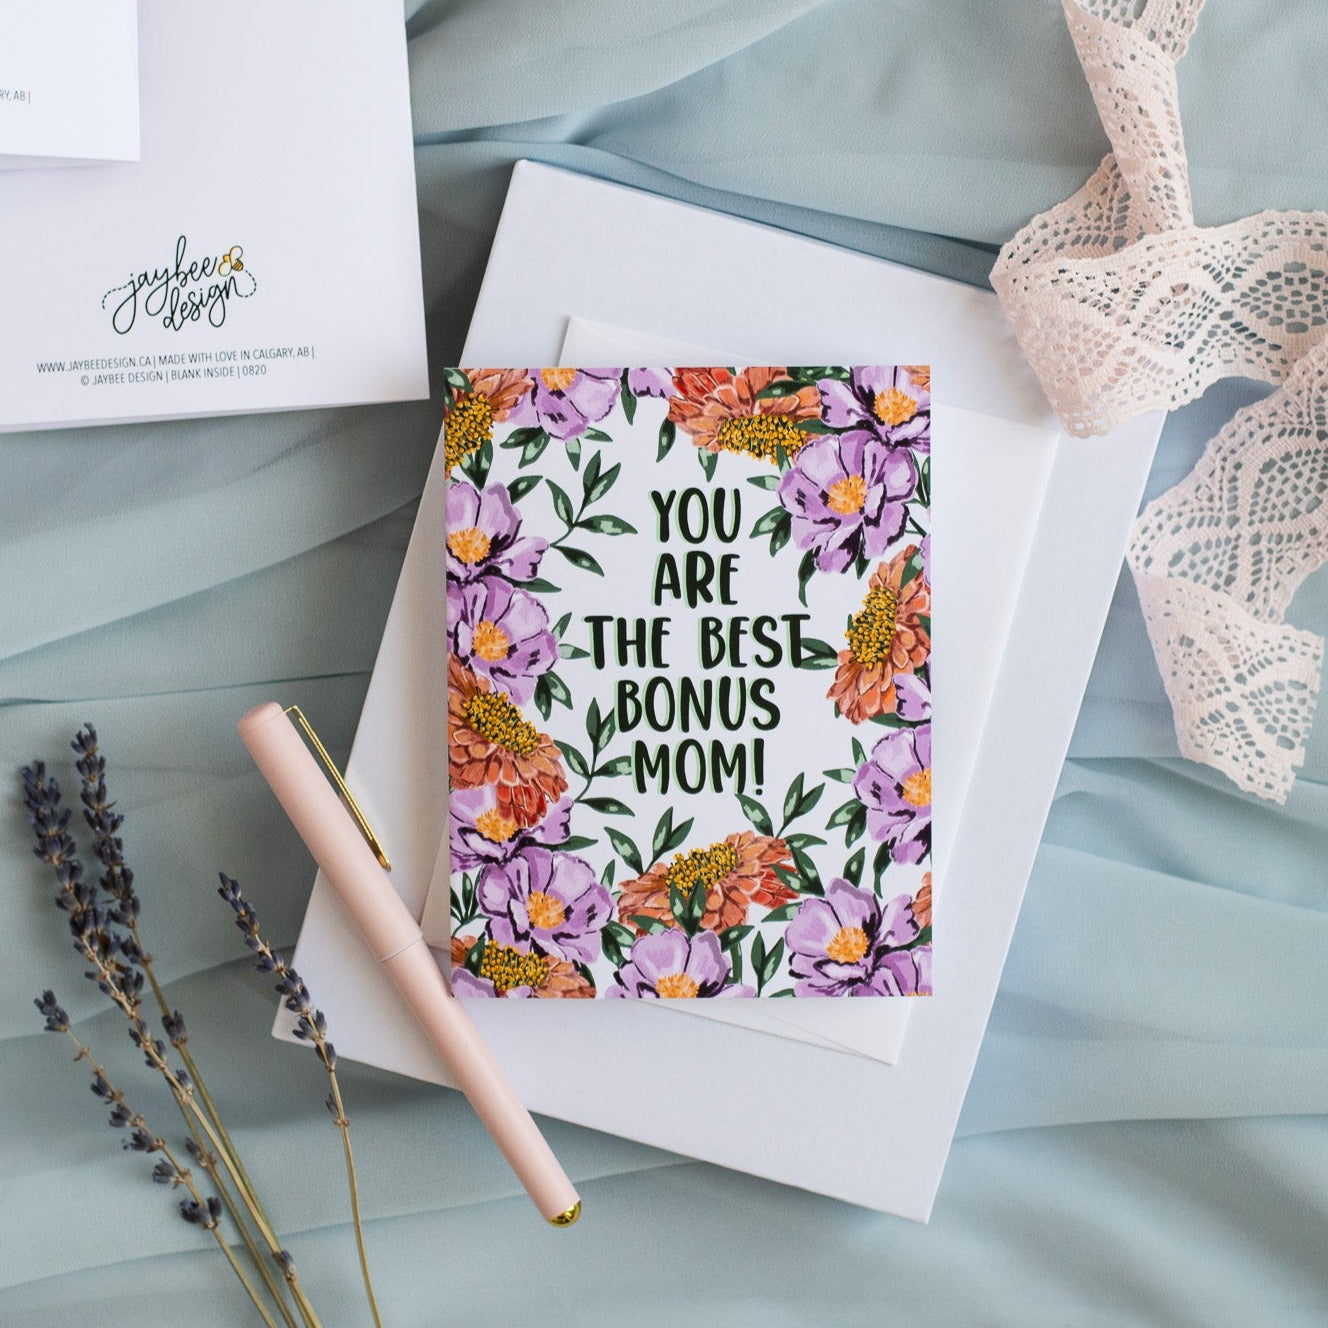 You Are The Best Bonus Mom! - Greeting Card